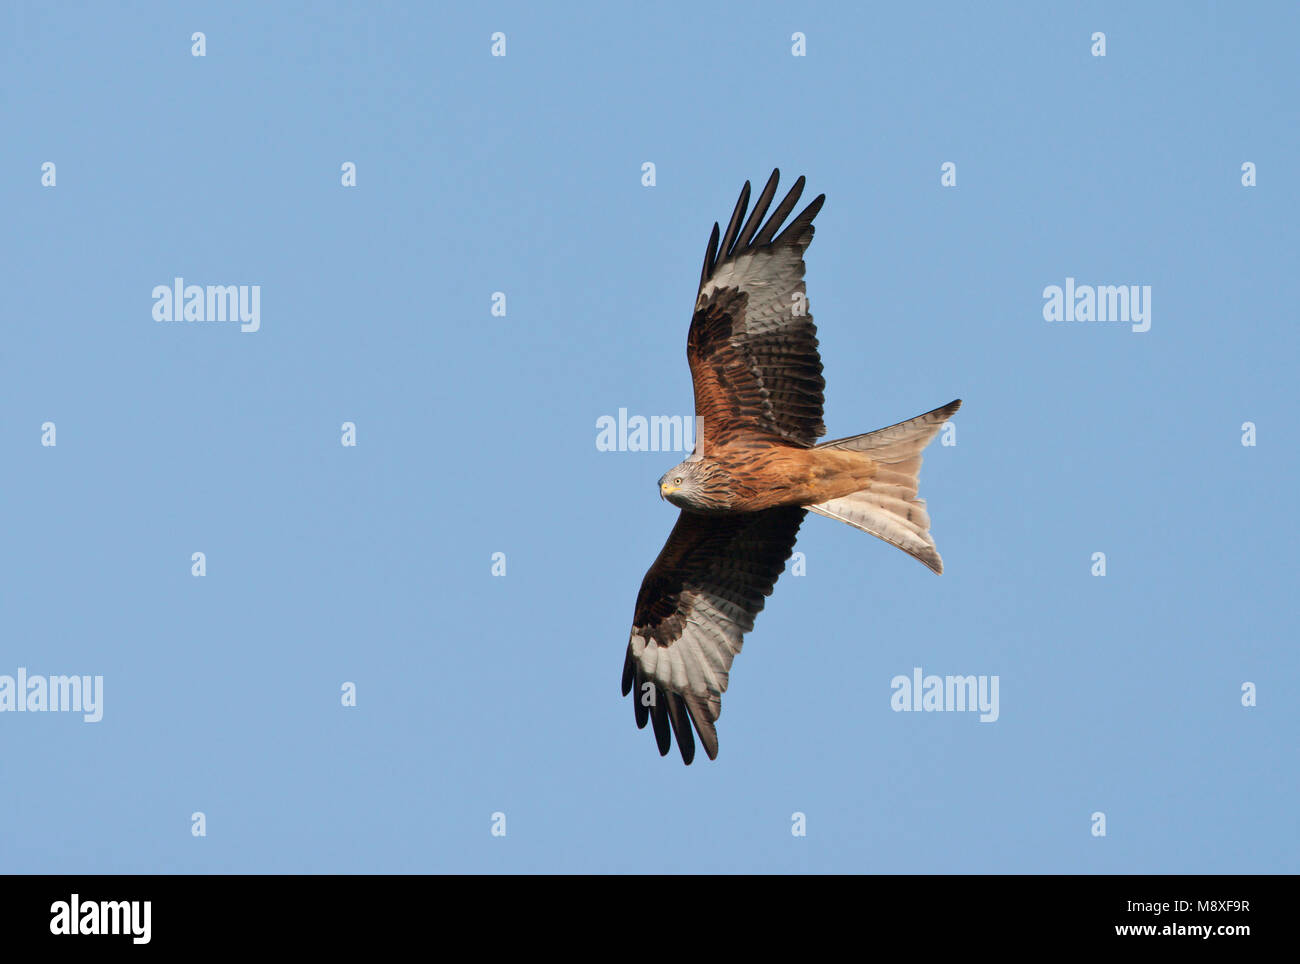 Vliegende Rode Wouw in blauwe lucht. Flying Red Kite against blue sky. Stock Photo